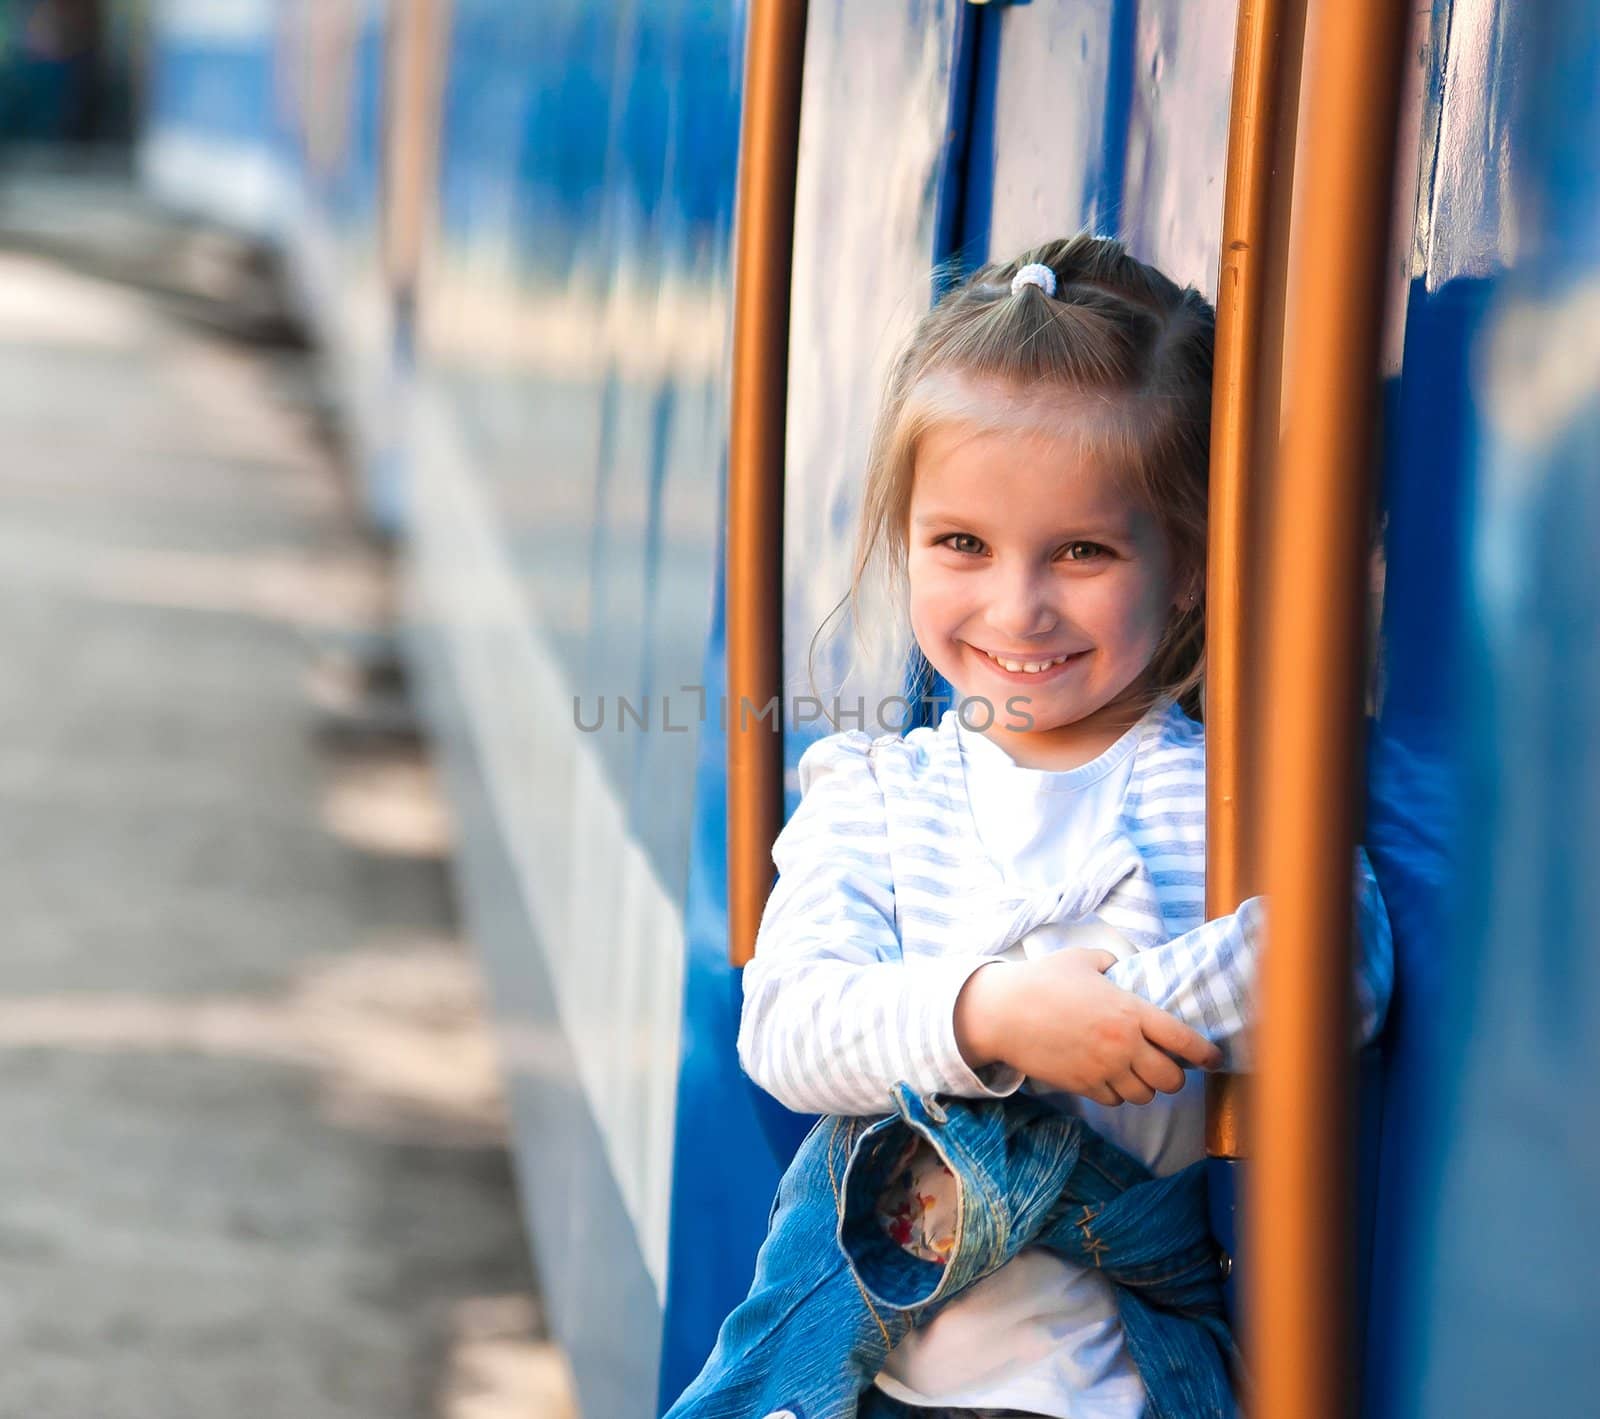 little girl on the playground by GekaSkr